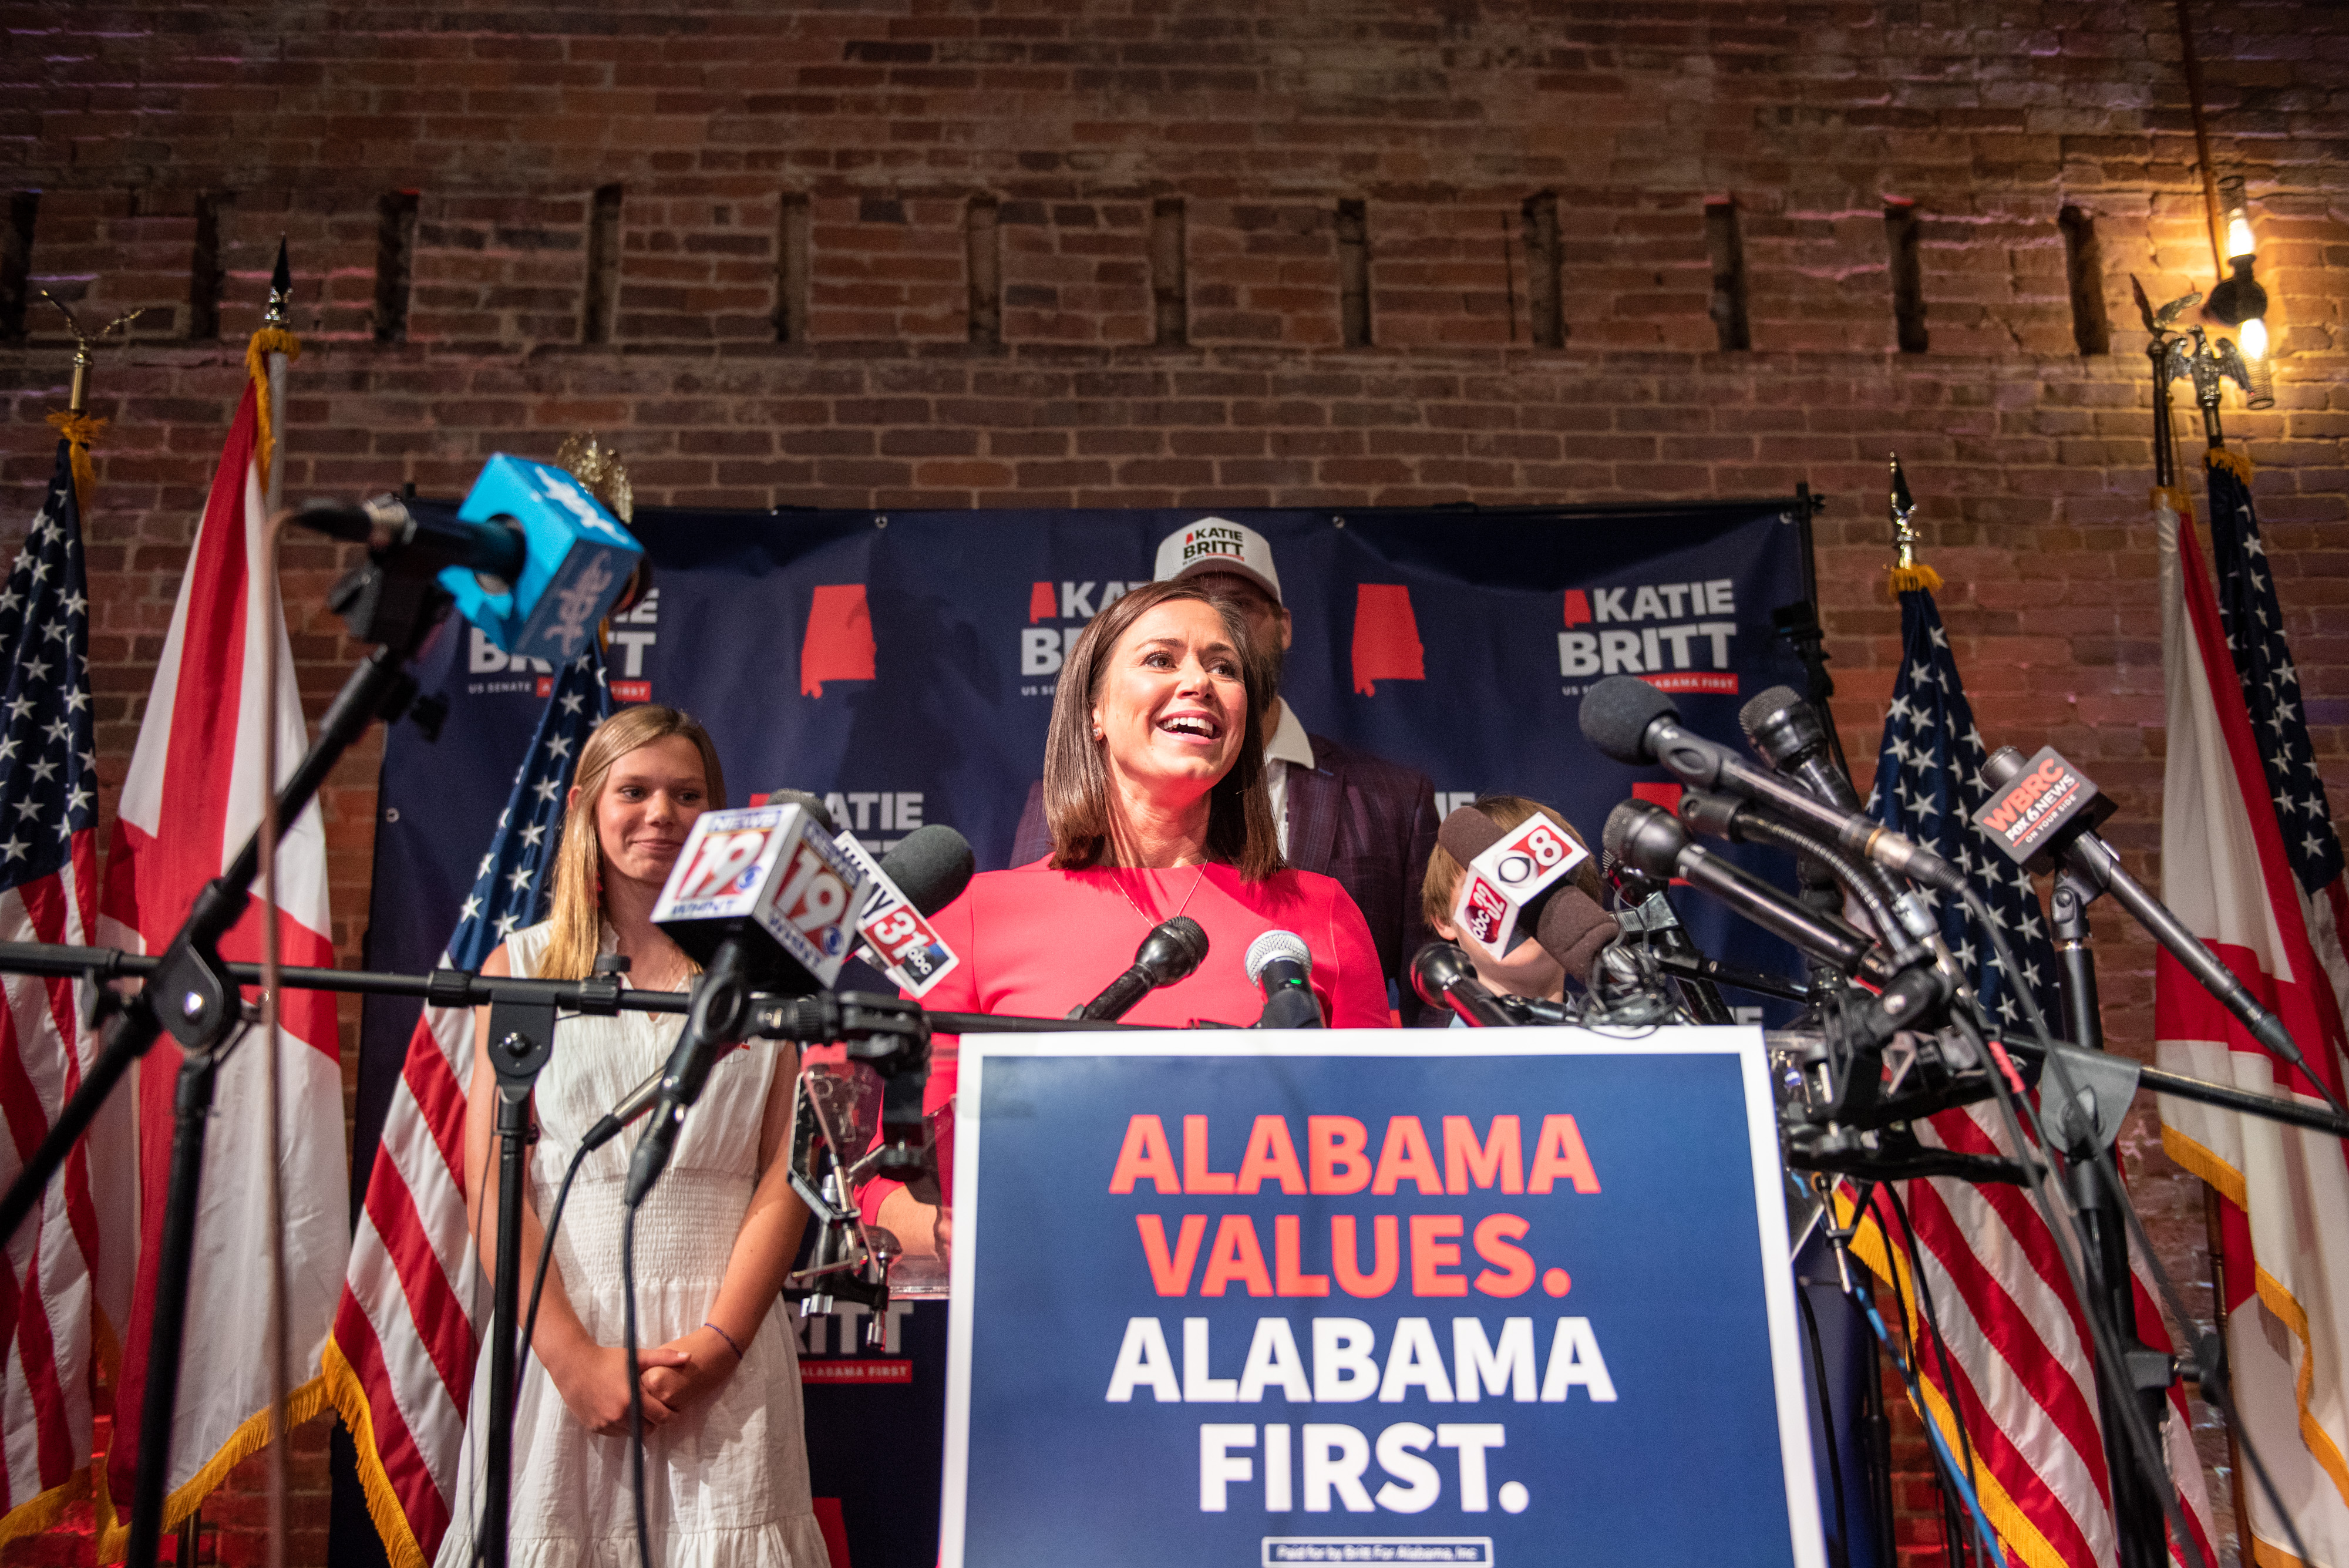 Britt, with a brown bob in a red dress, stands behind a podium emblazoned with the message: “Alabama Values. Alabama First.” Behind her are US and Alabama flags, as well as her family.